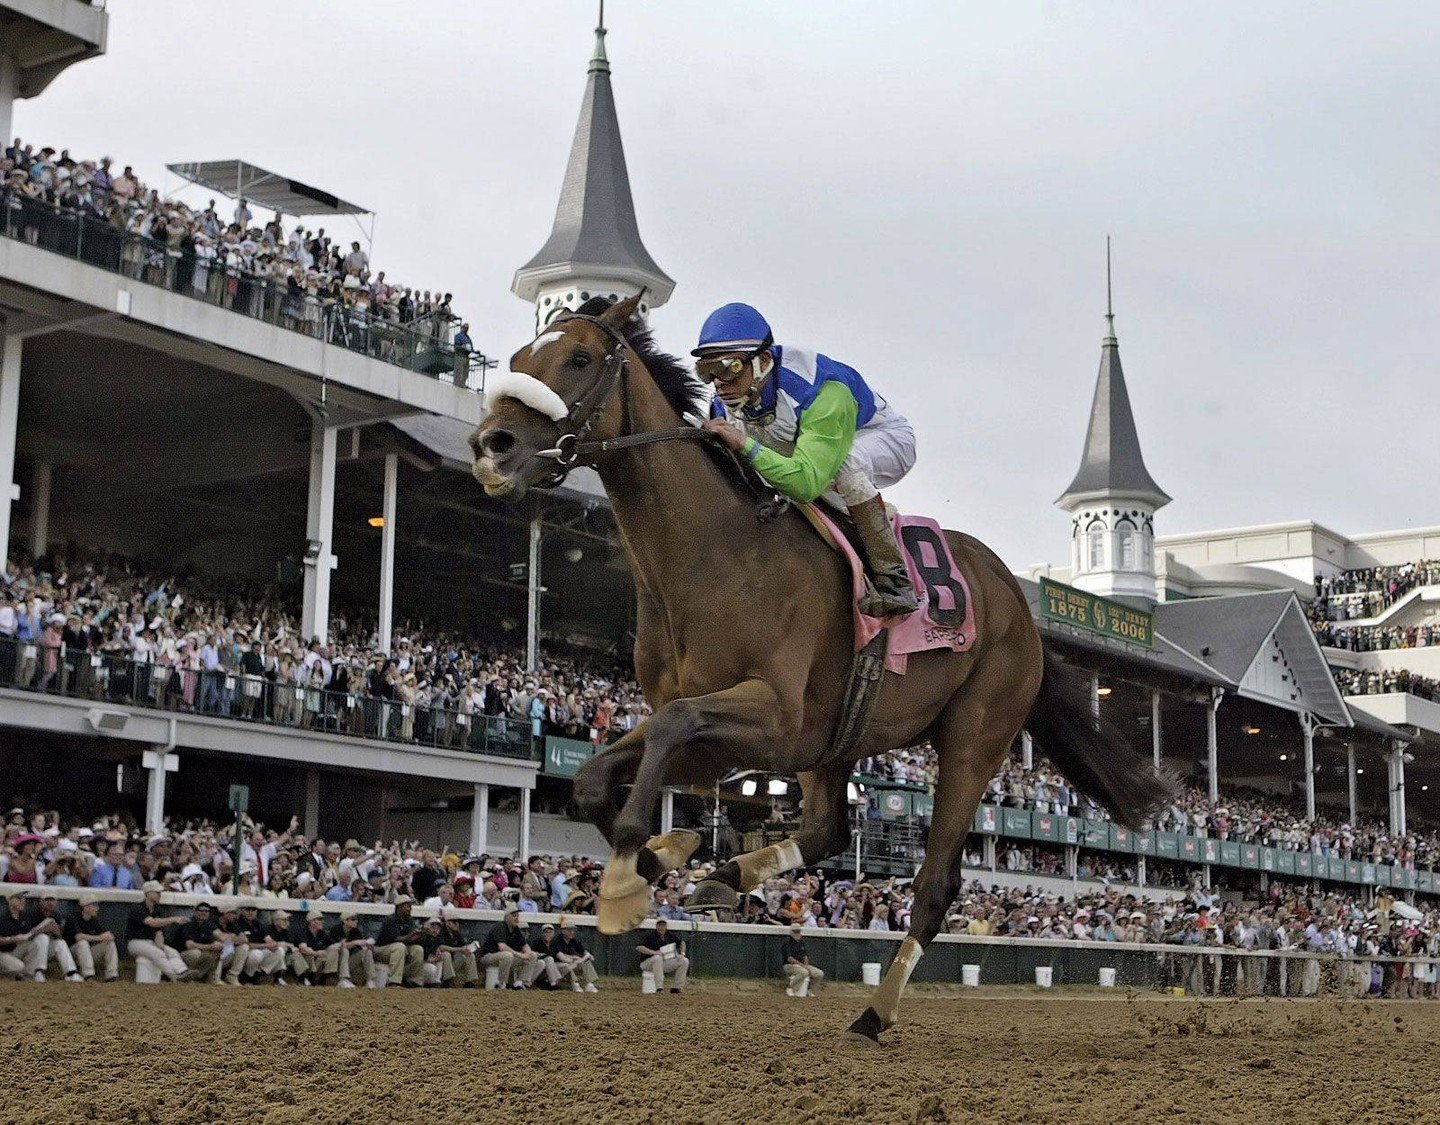 The Kentucky Derby starts just before 7 pm! 

Watch at The Coop! 

#kentuckyderby #thecoop